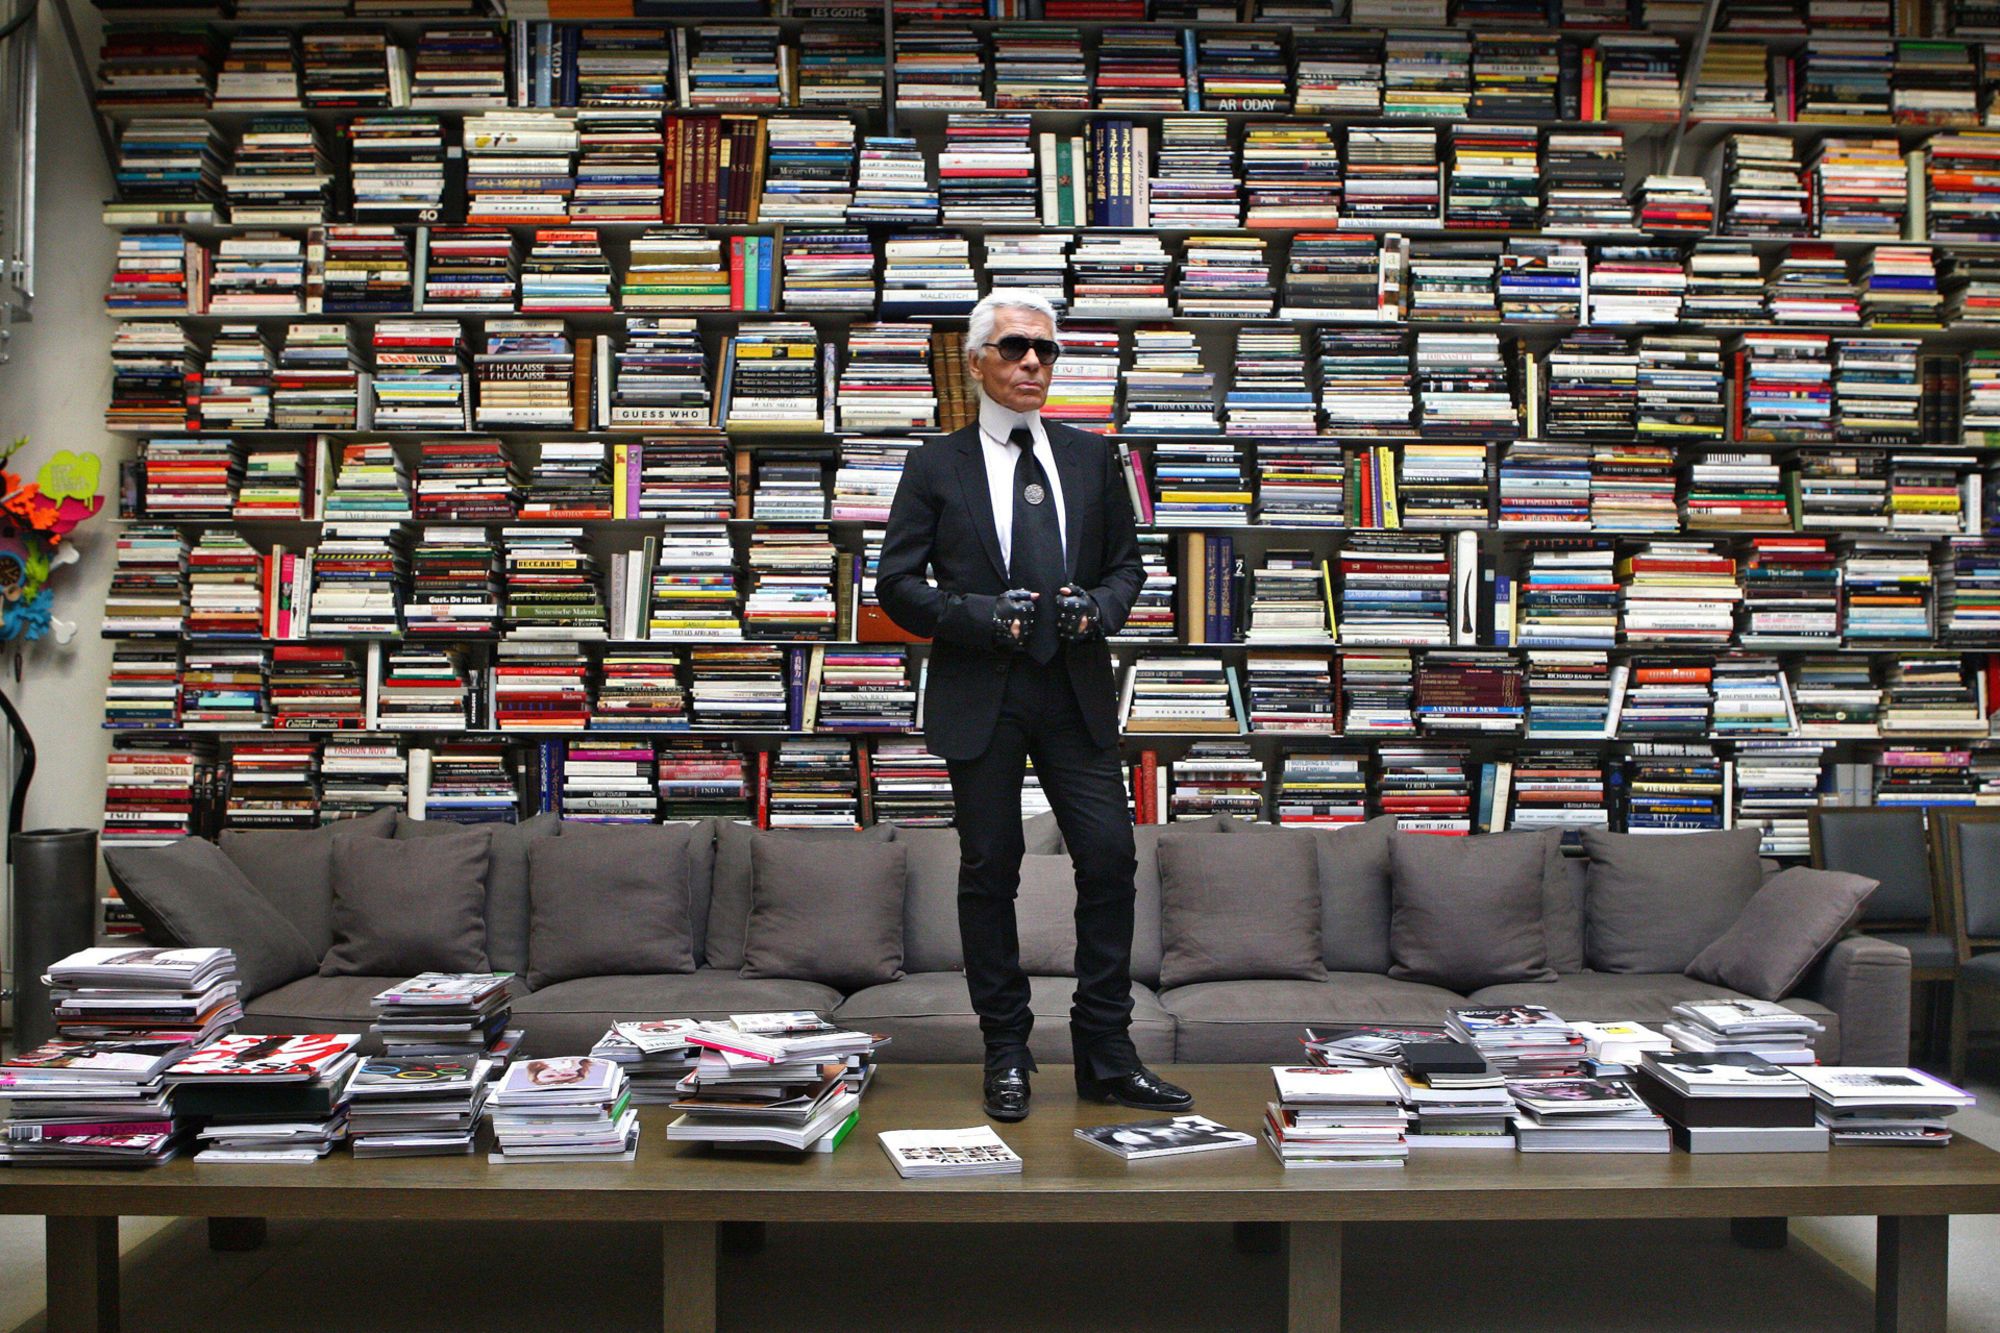 Karl Lagerfeld poses in his book-filled apartment and studio on Rue de Lille in Paris, France on November 12, 2008.